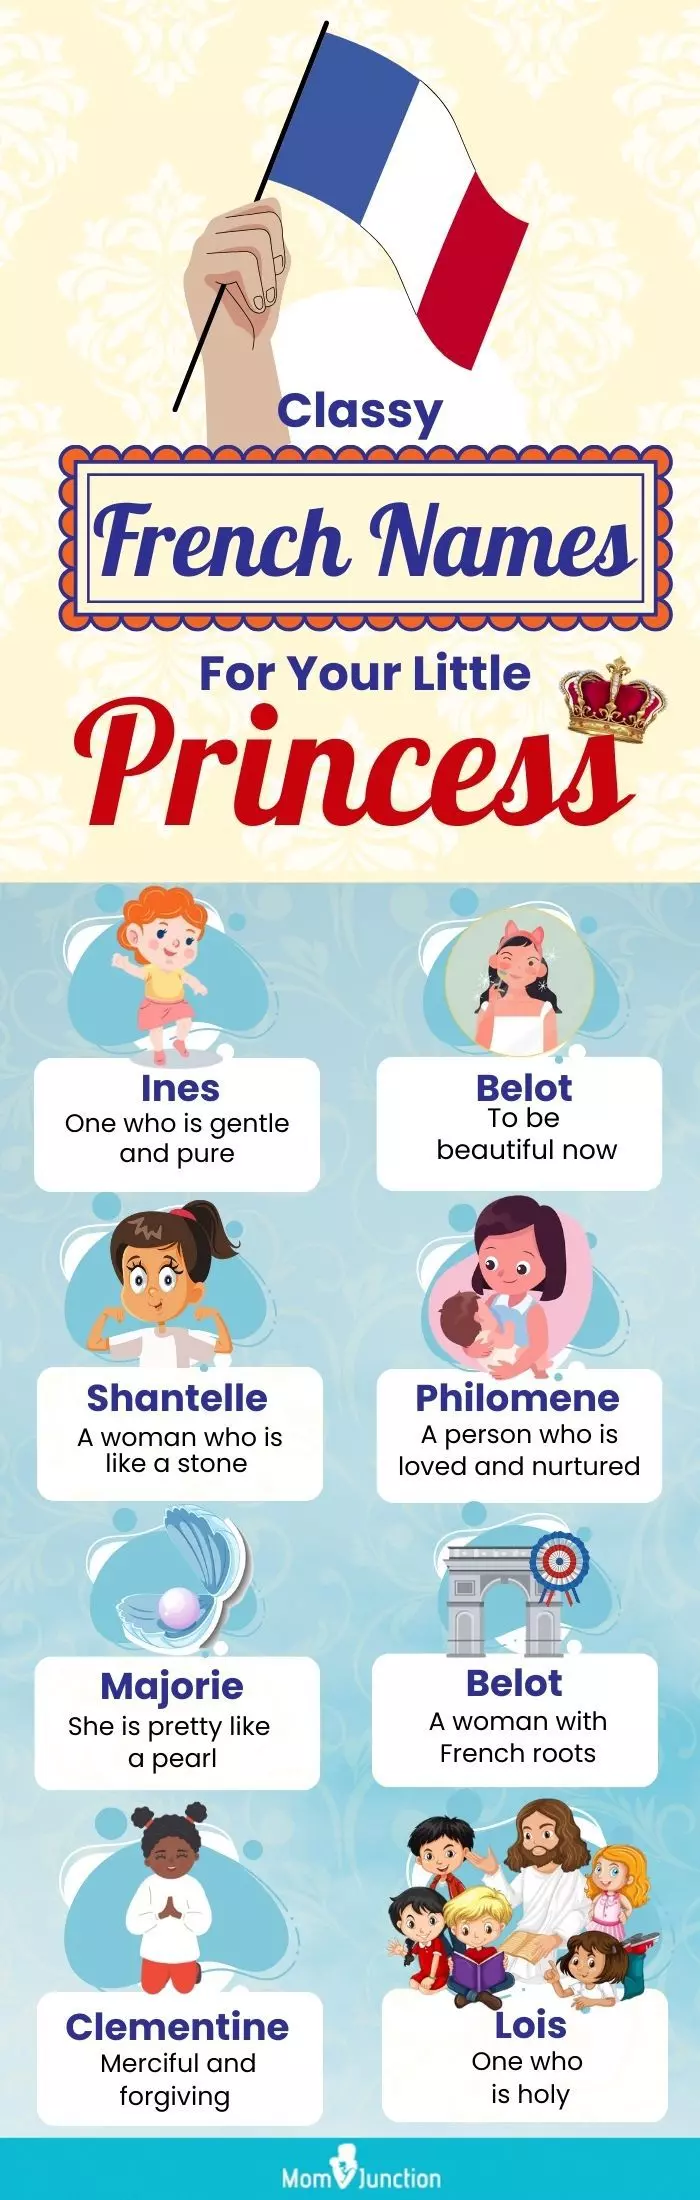 classy french names for your little princess (infographic)